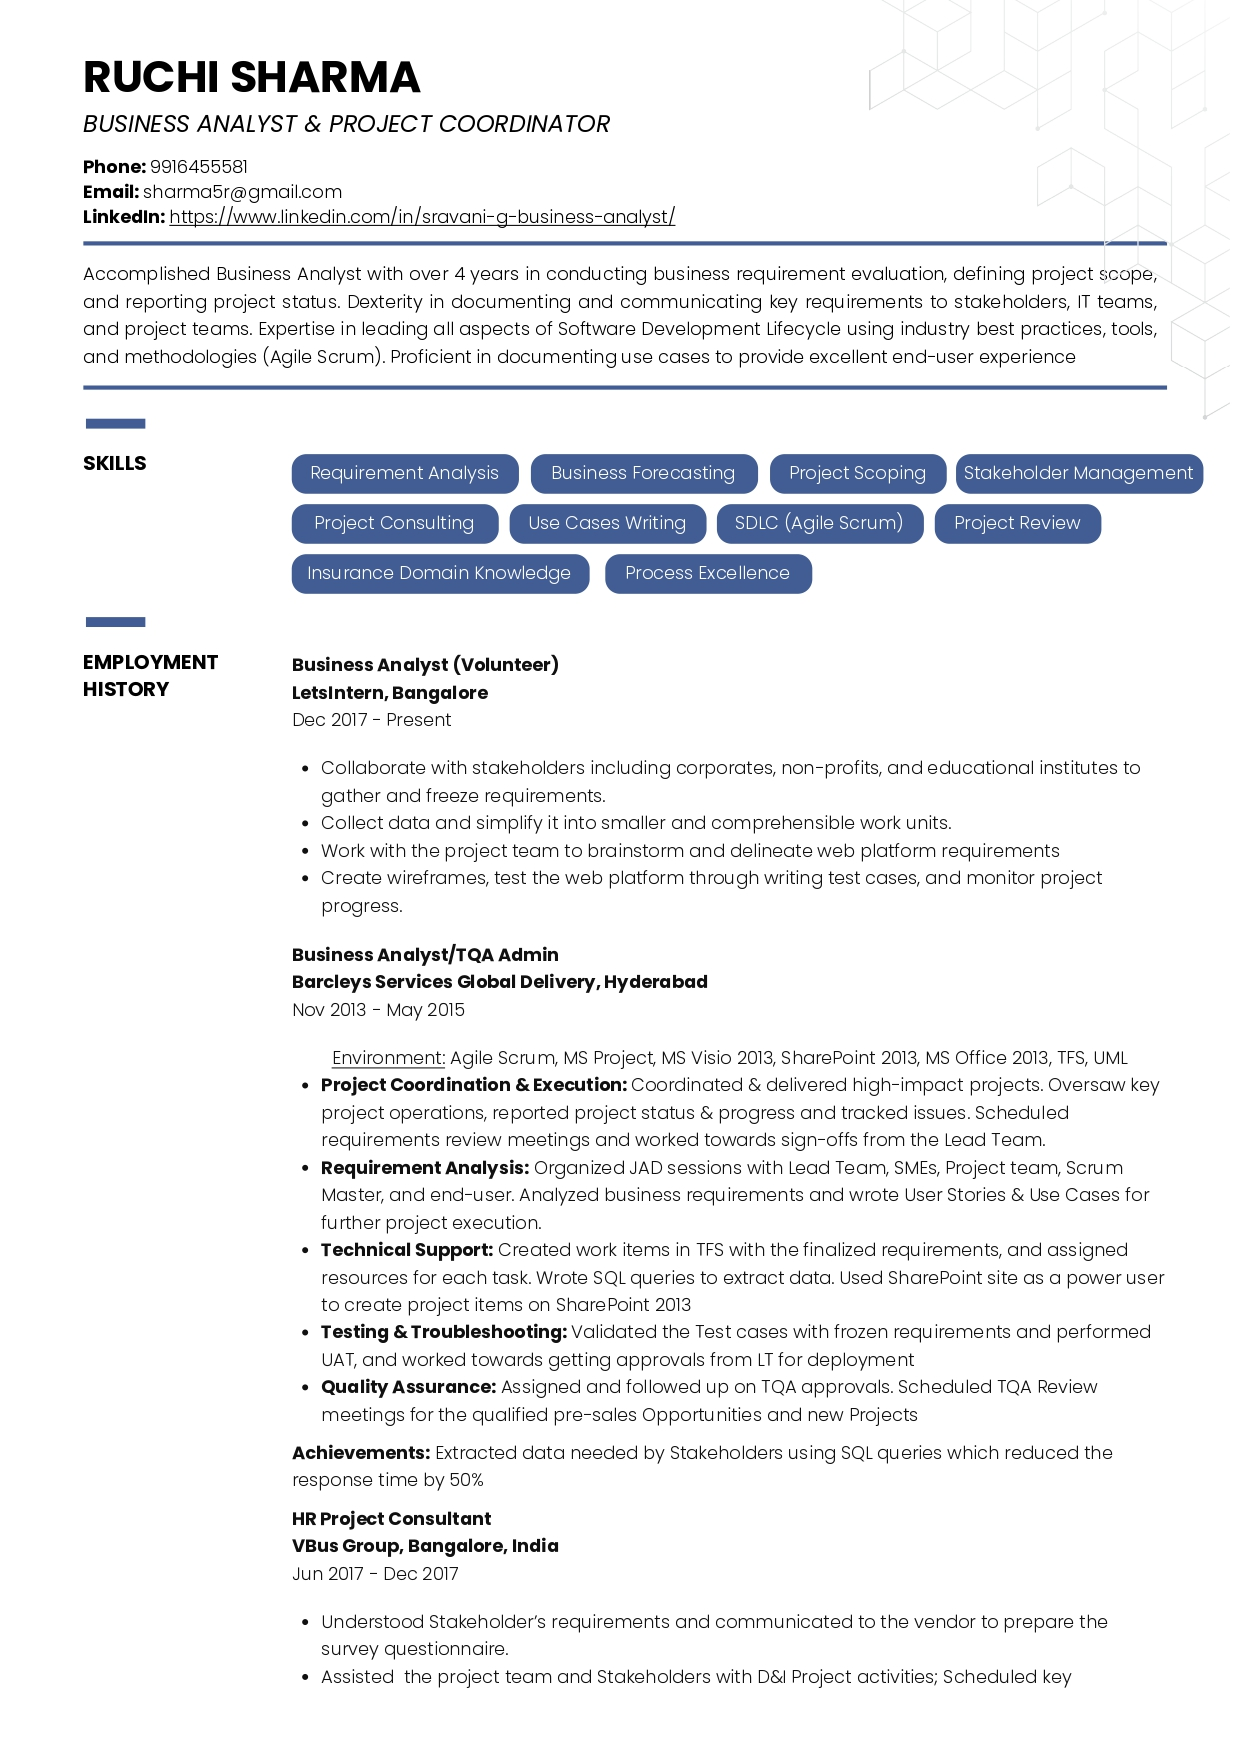 Resume of Business Analyst and Project Coordinator built on Resumod